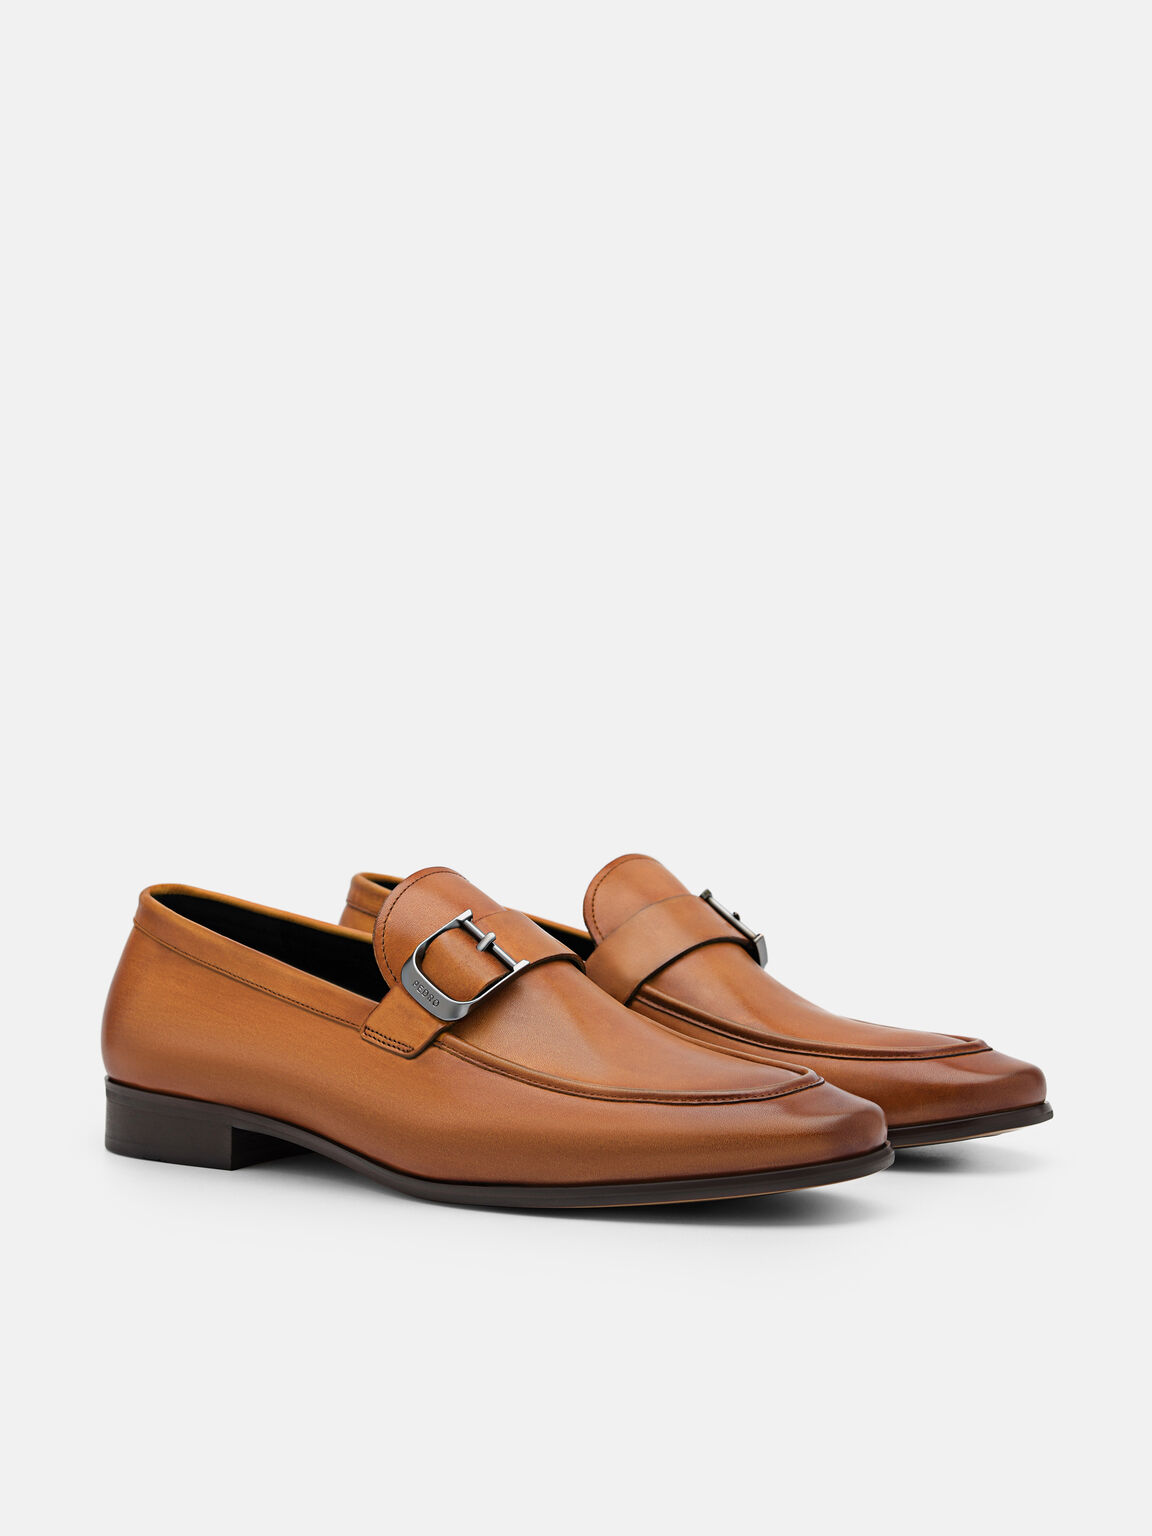 Helix Leather Loafers, Camel, hi-res